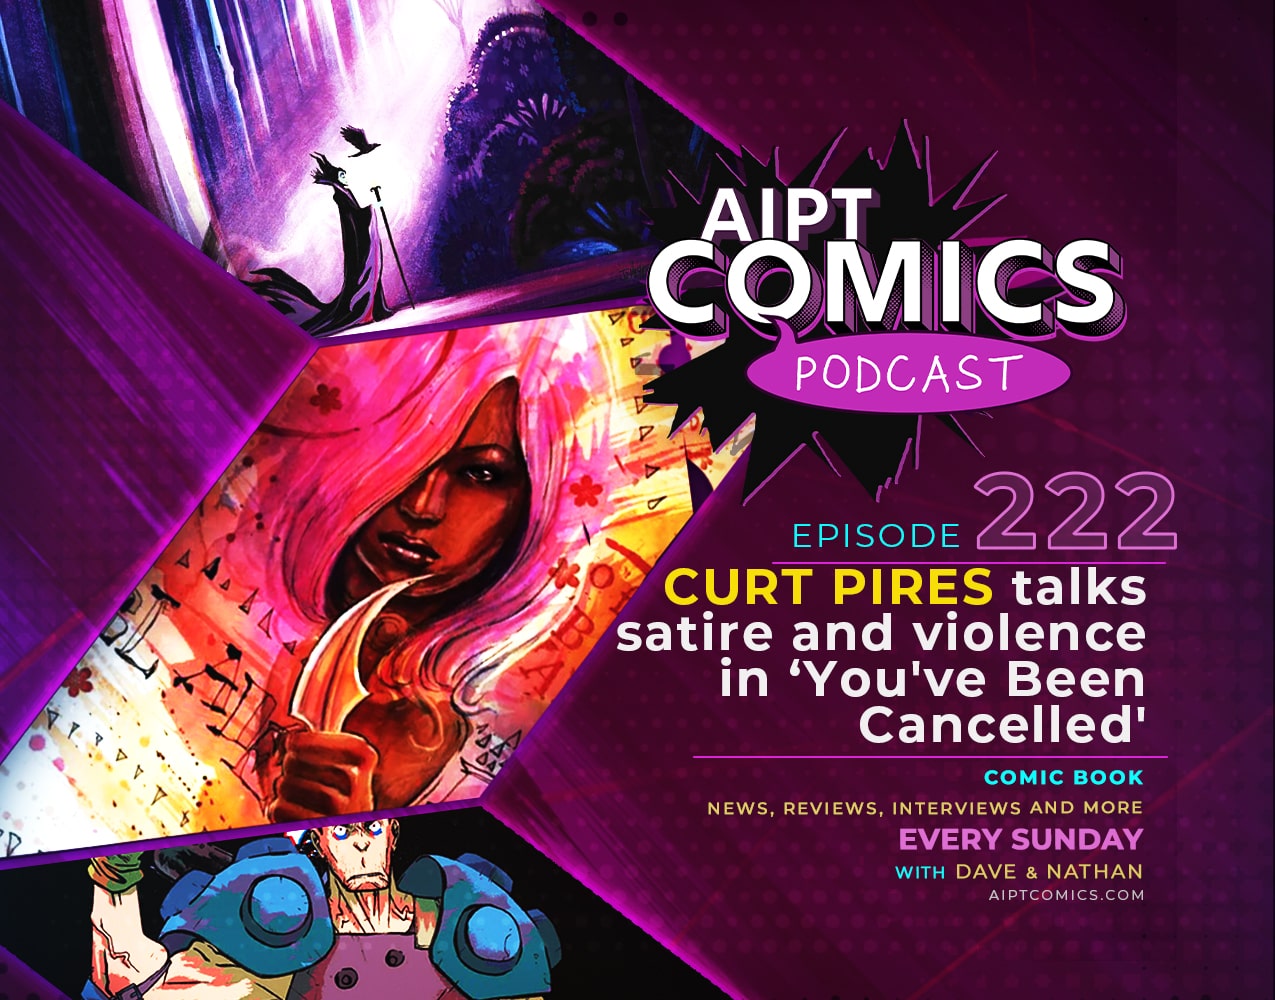 AIPT Comics Podcast episode 222: Curt Pires talks satire and violence in 'You've Been Cancelled'